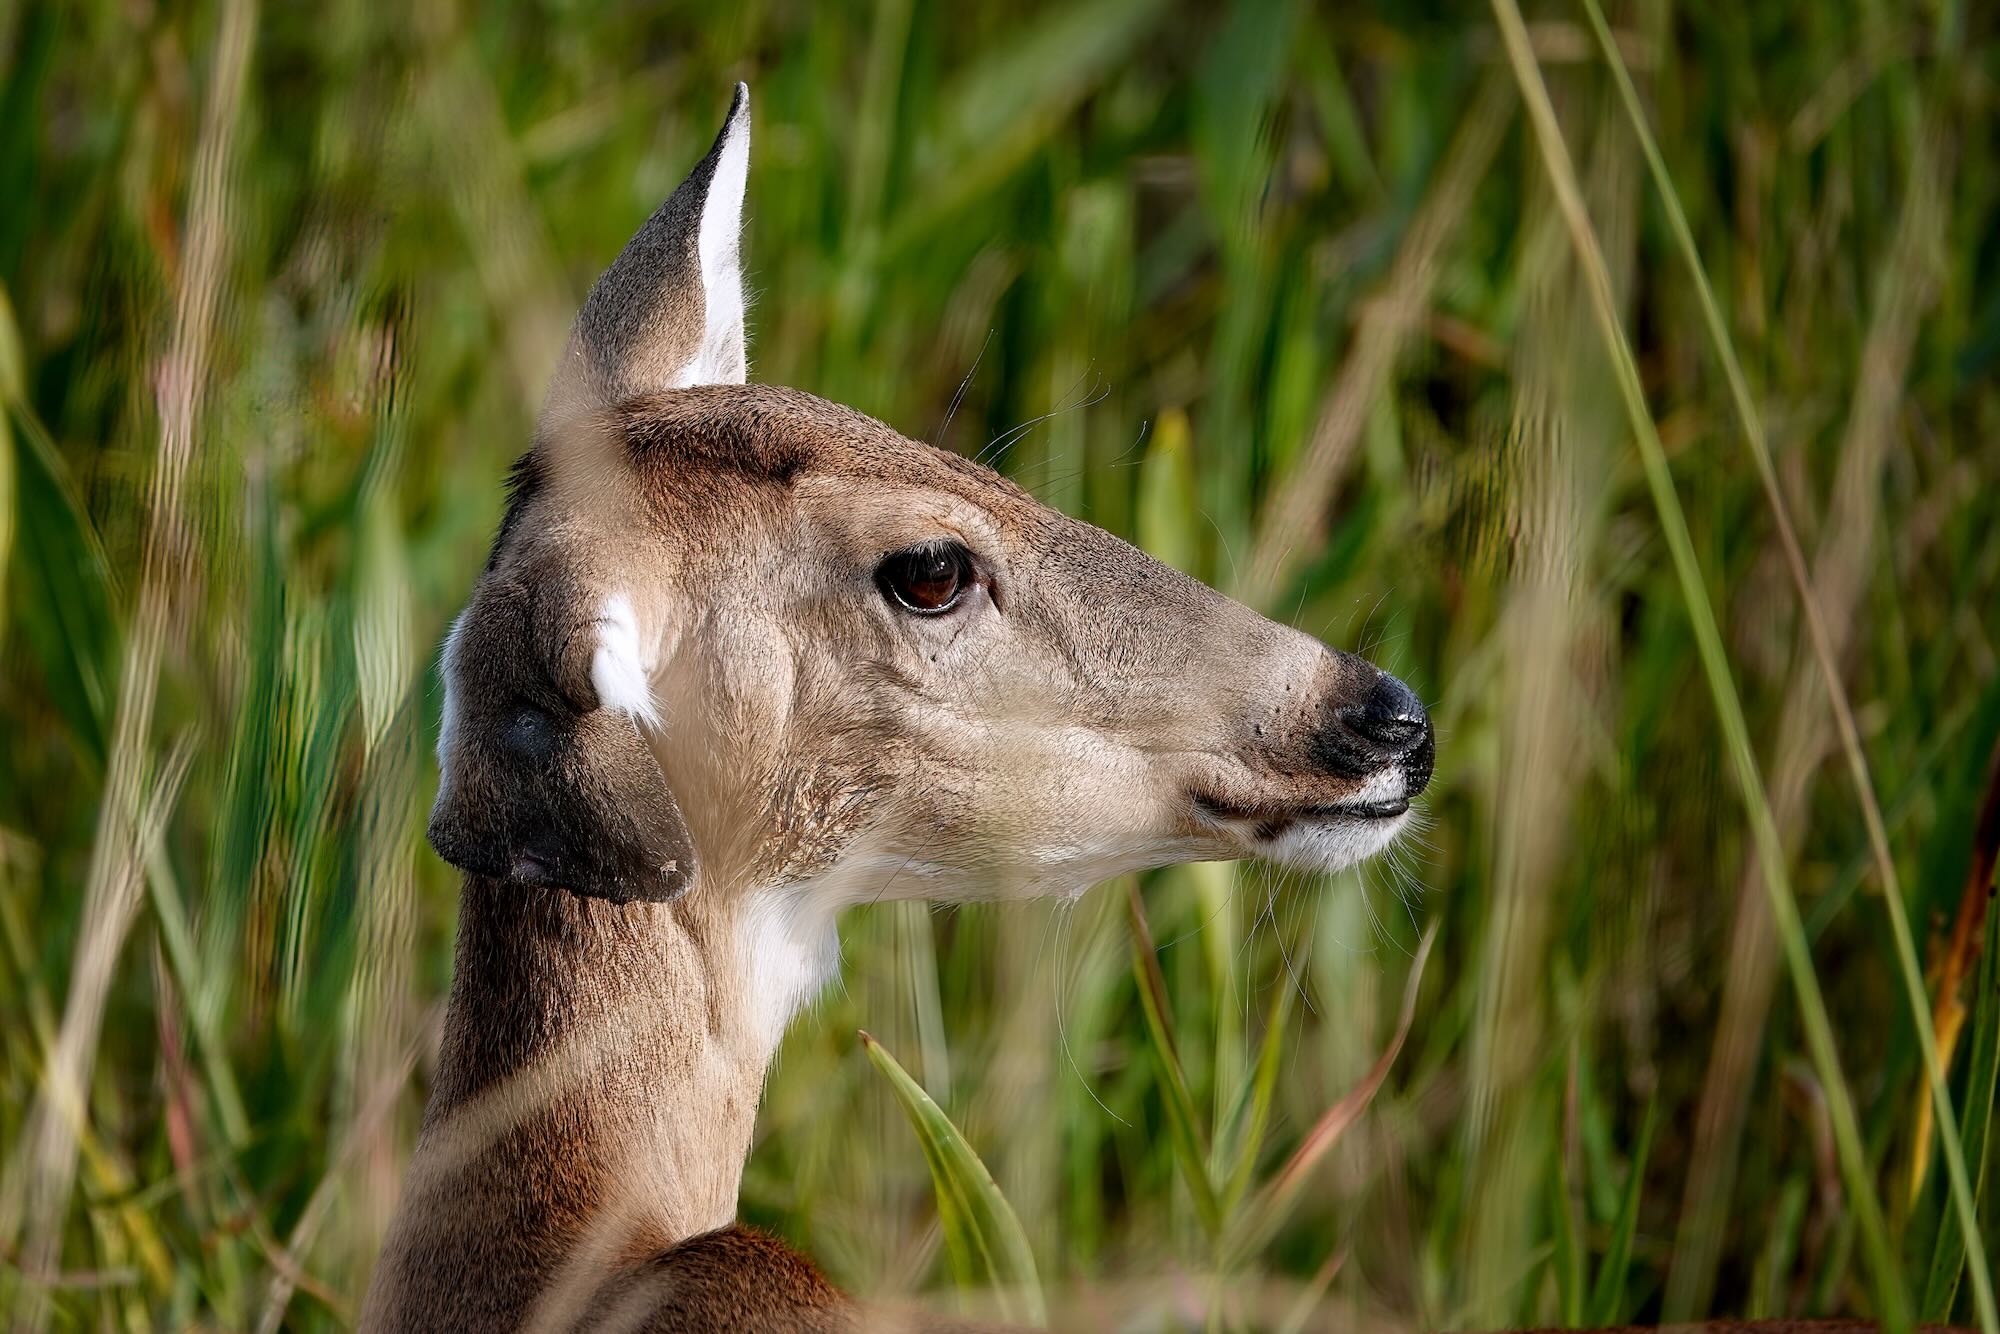 Doe, Photo by Dave Cottrill